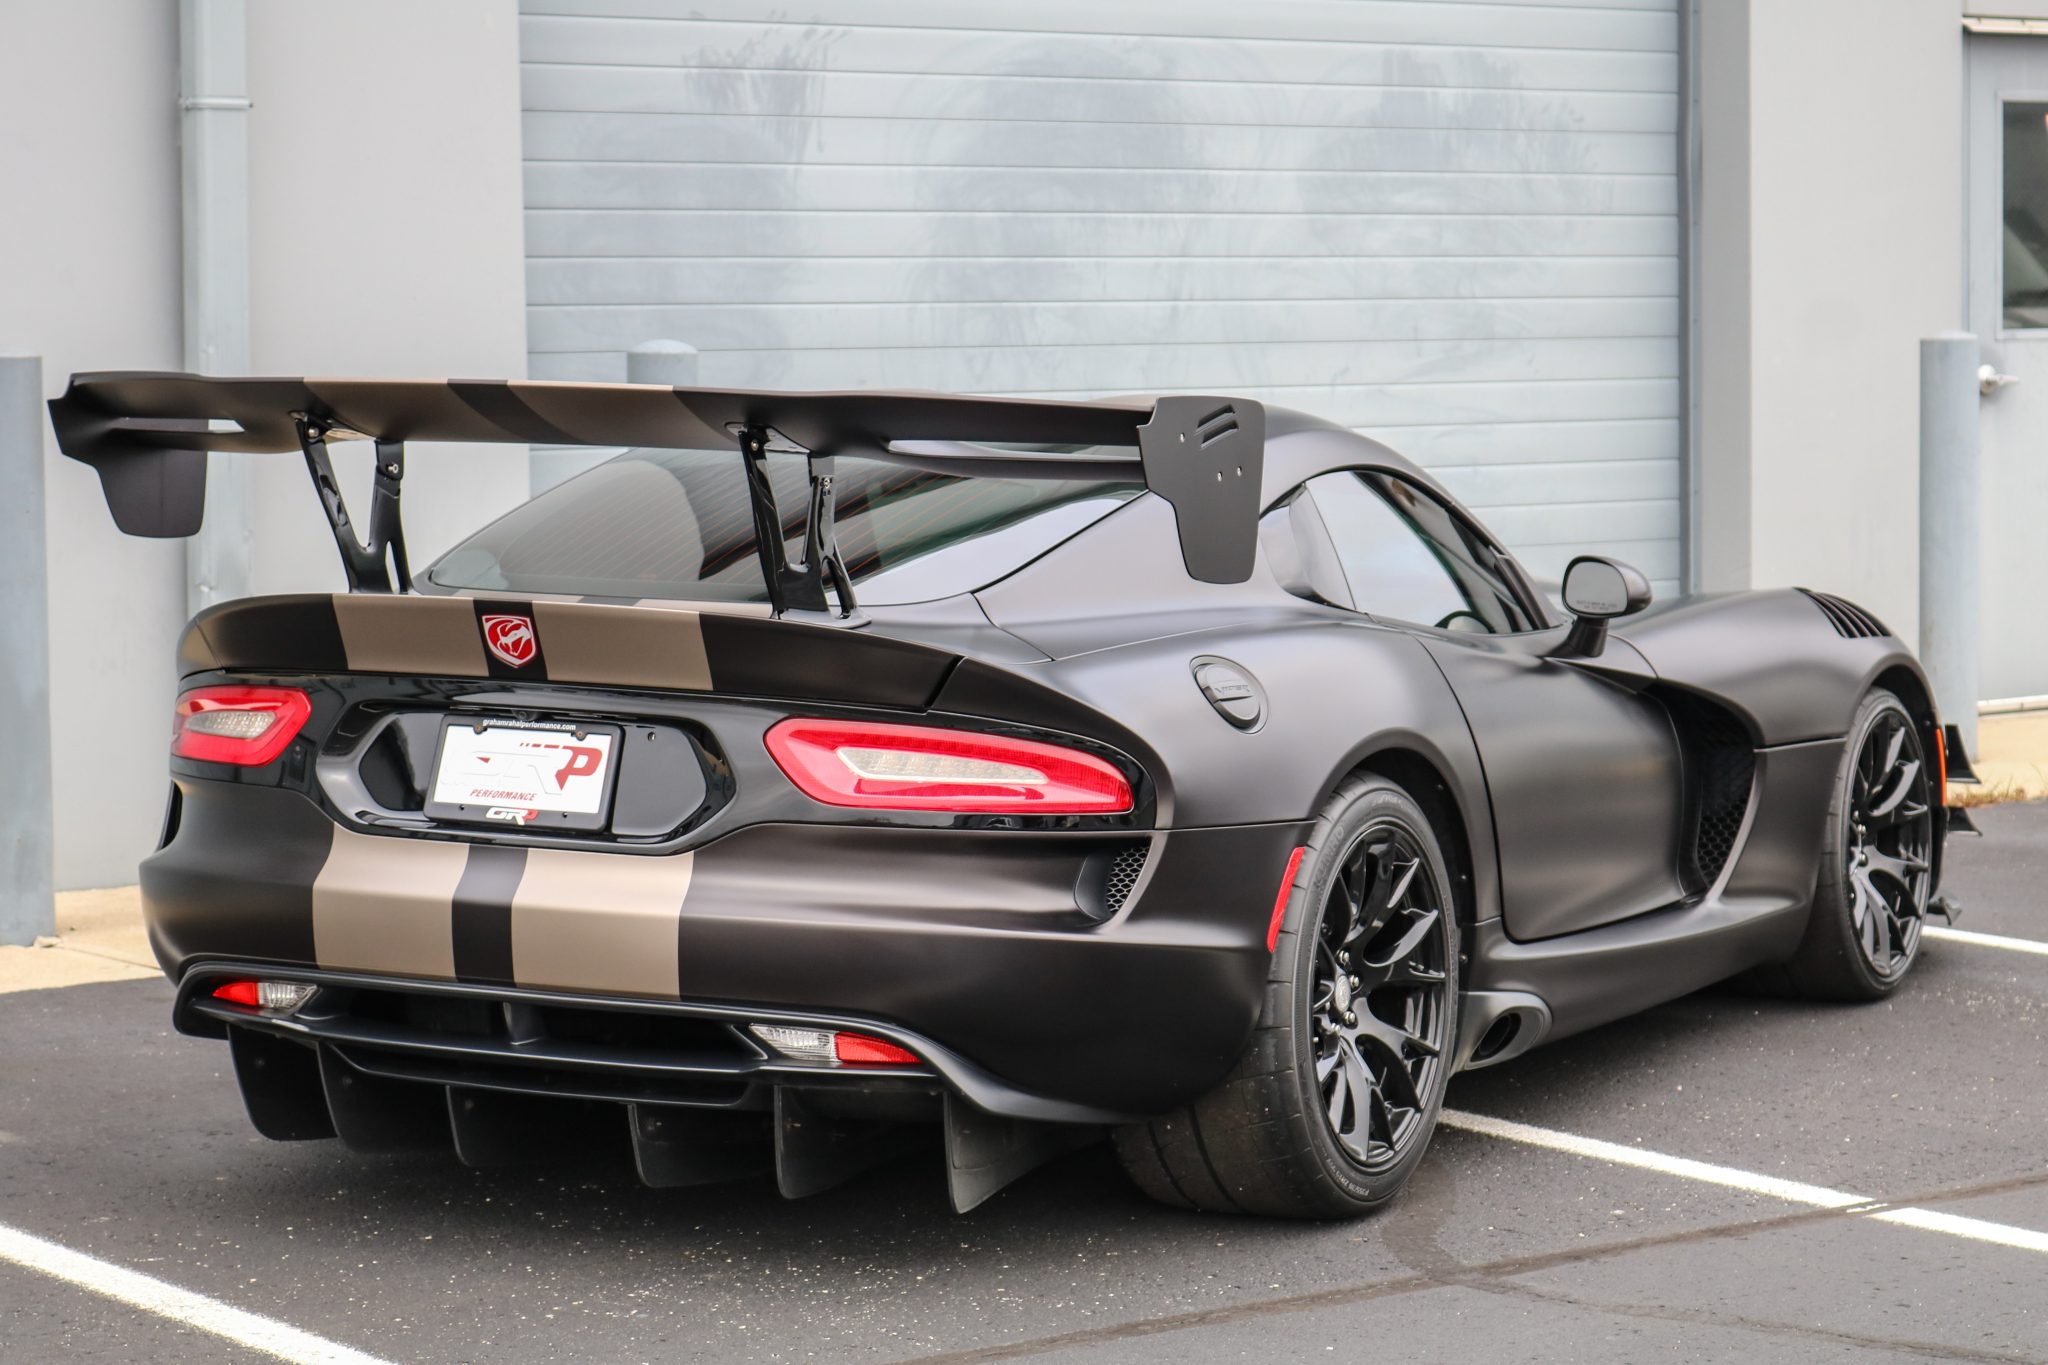 This Dodge Viper Acr Extreme Was The Very First Built For 17 Carscoops